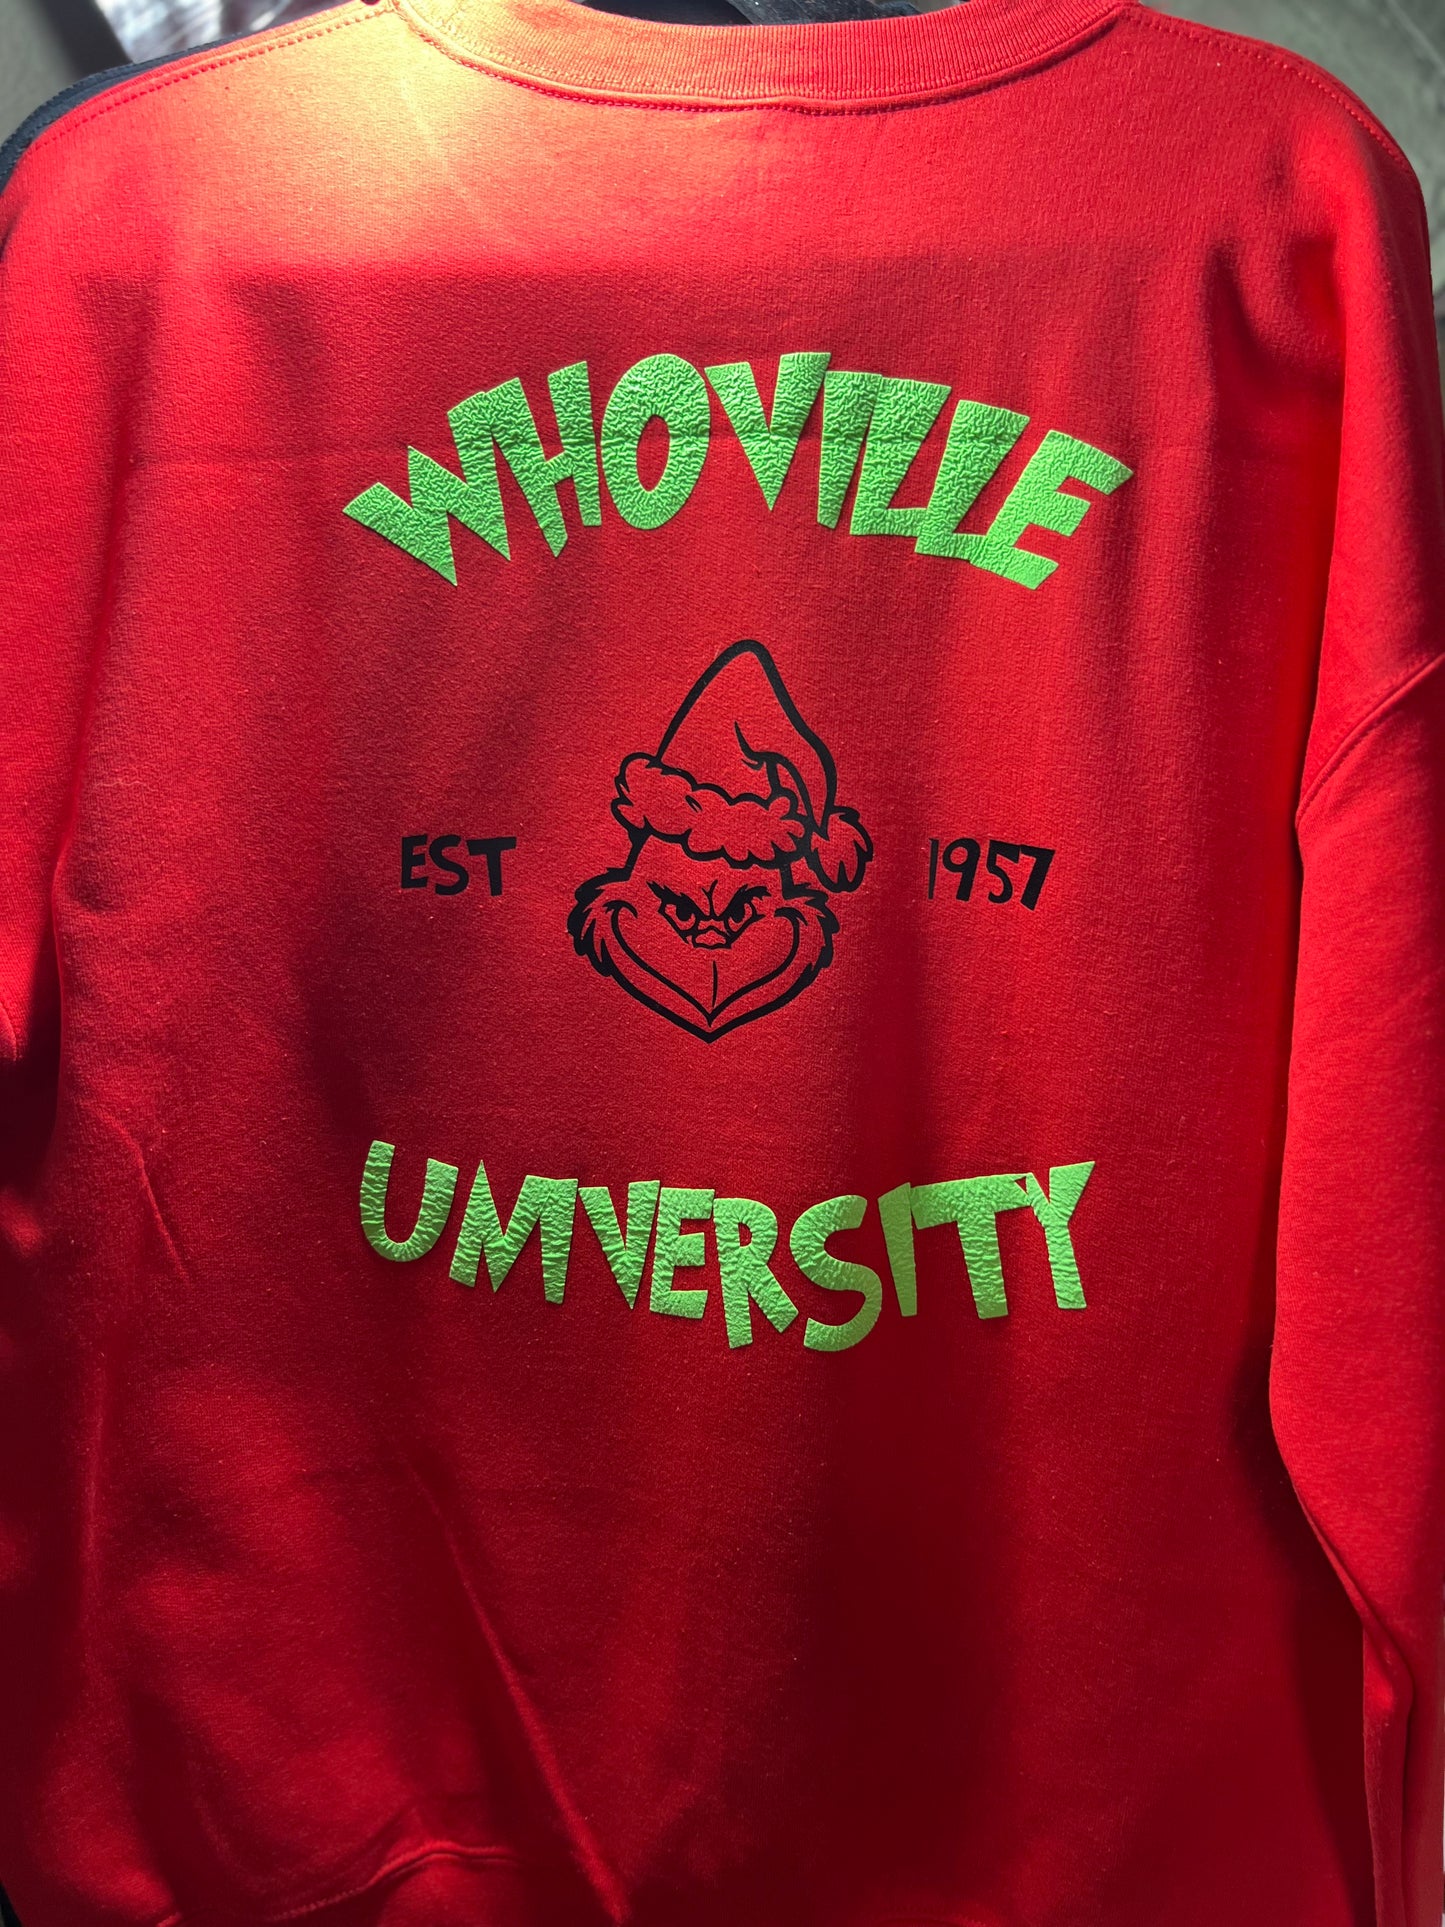 Cozy Up in Style with Whoville University Red Grinch Sweatshirt – Limited Edition Comfort for the Festive Season!